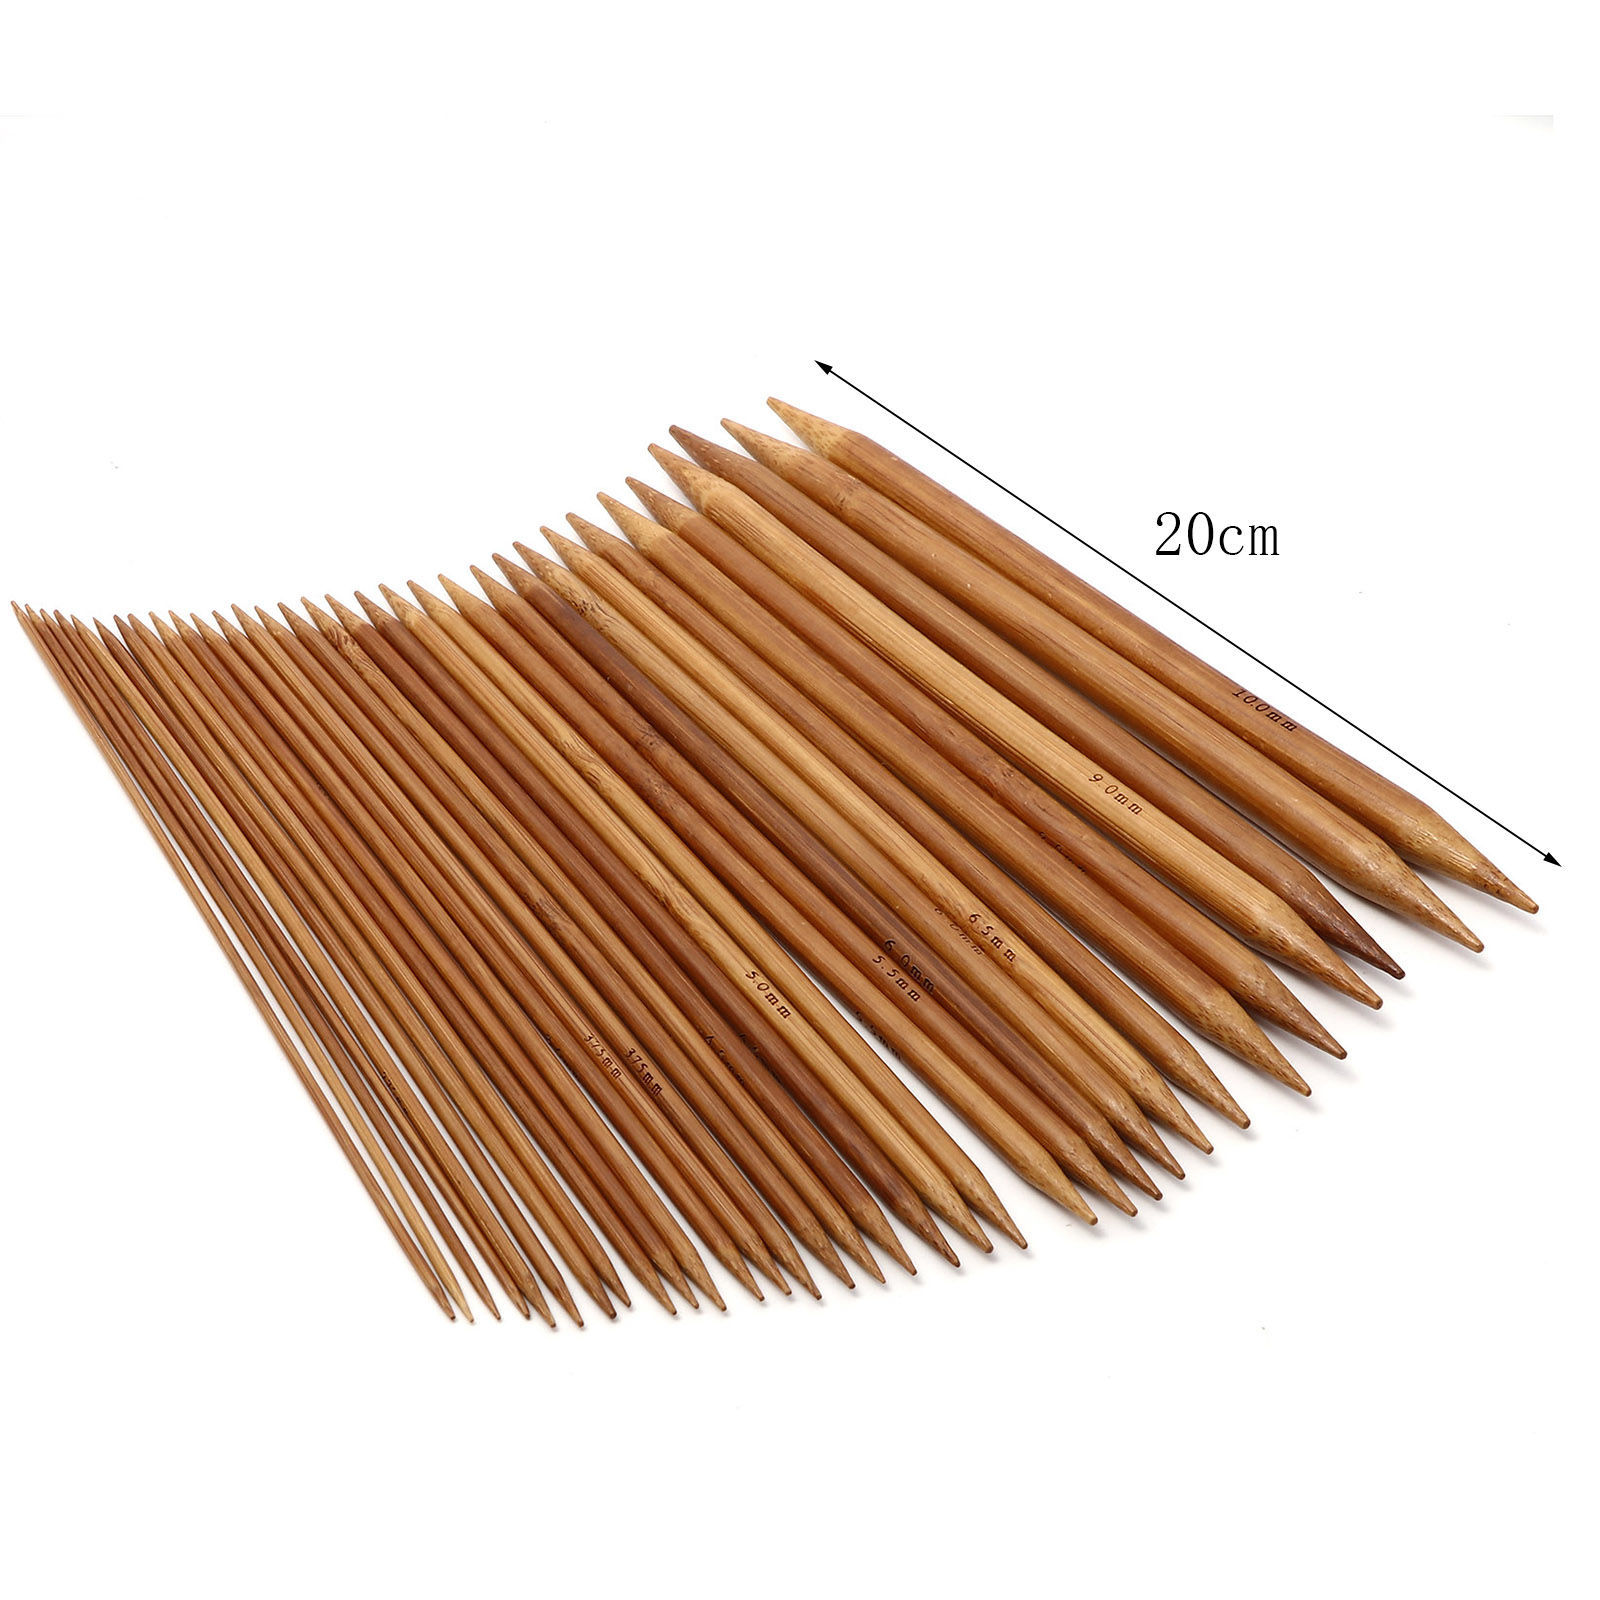 Picture of Bamboo Double Pointed Knitting Needles Brown 20cm(7 7/8") long